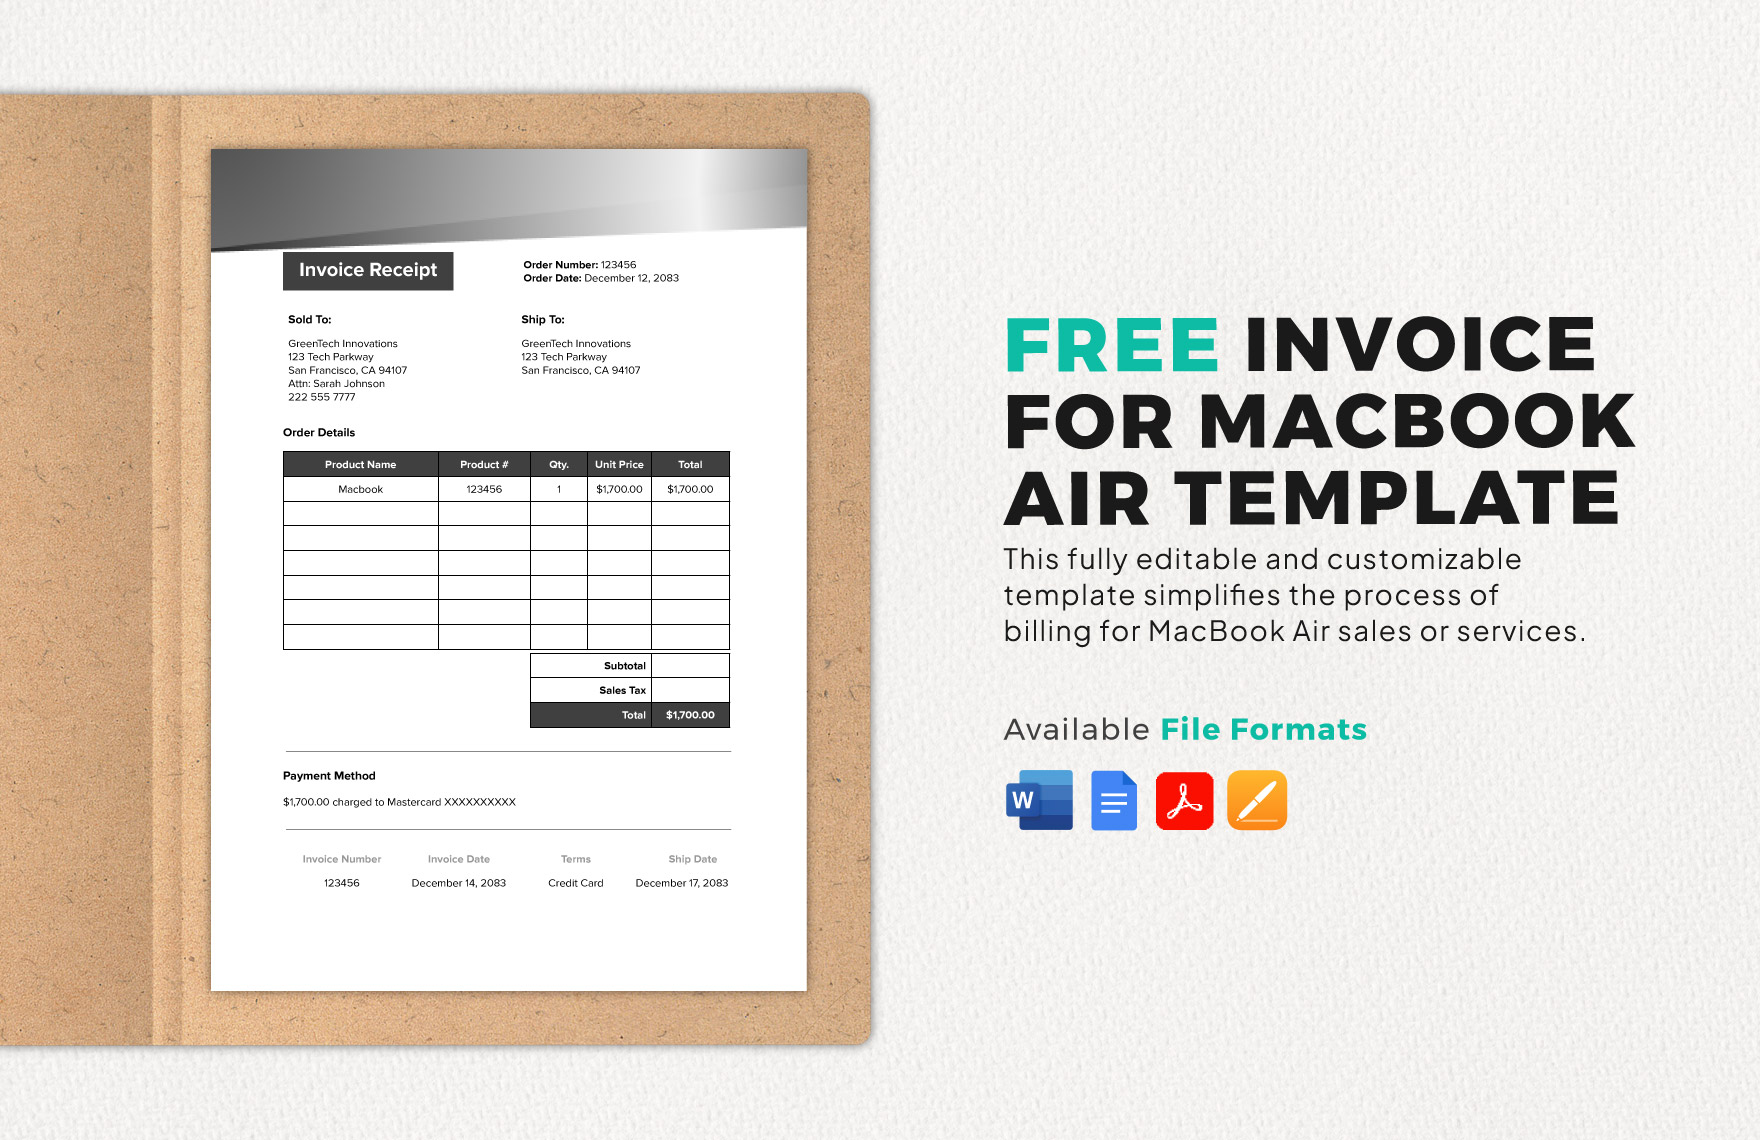 Invoice for Macbook Air Template